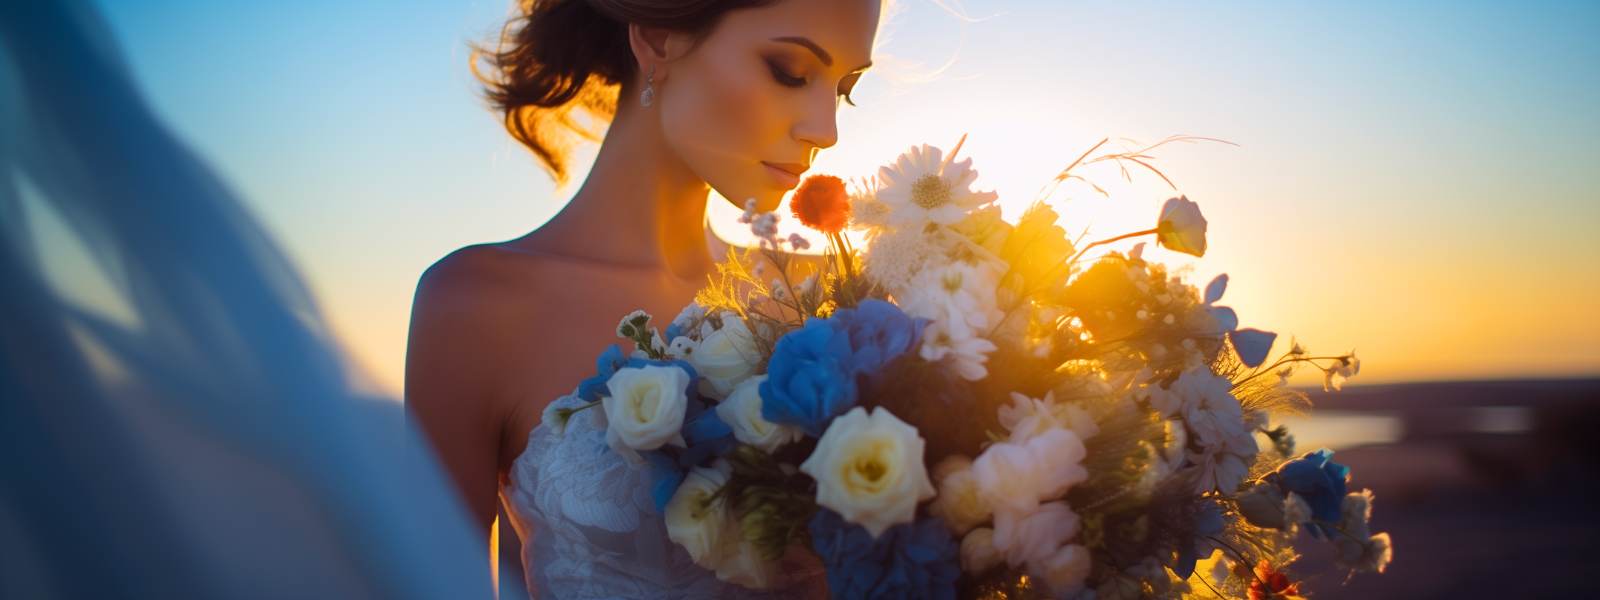 Gorgeous bride with her bridal bouquet of white and blue flowers during Cape Town sunset - Fabulous Flowers